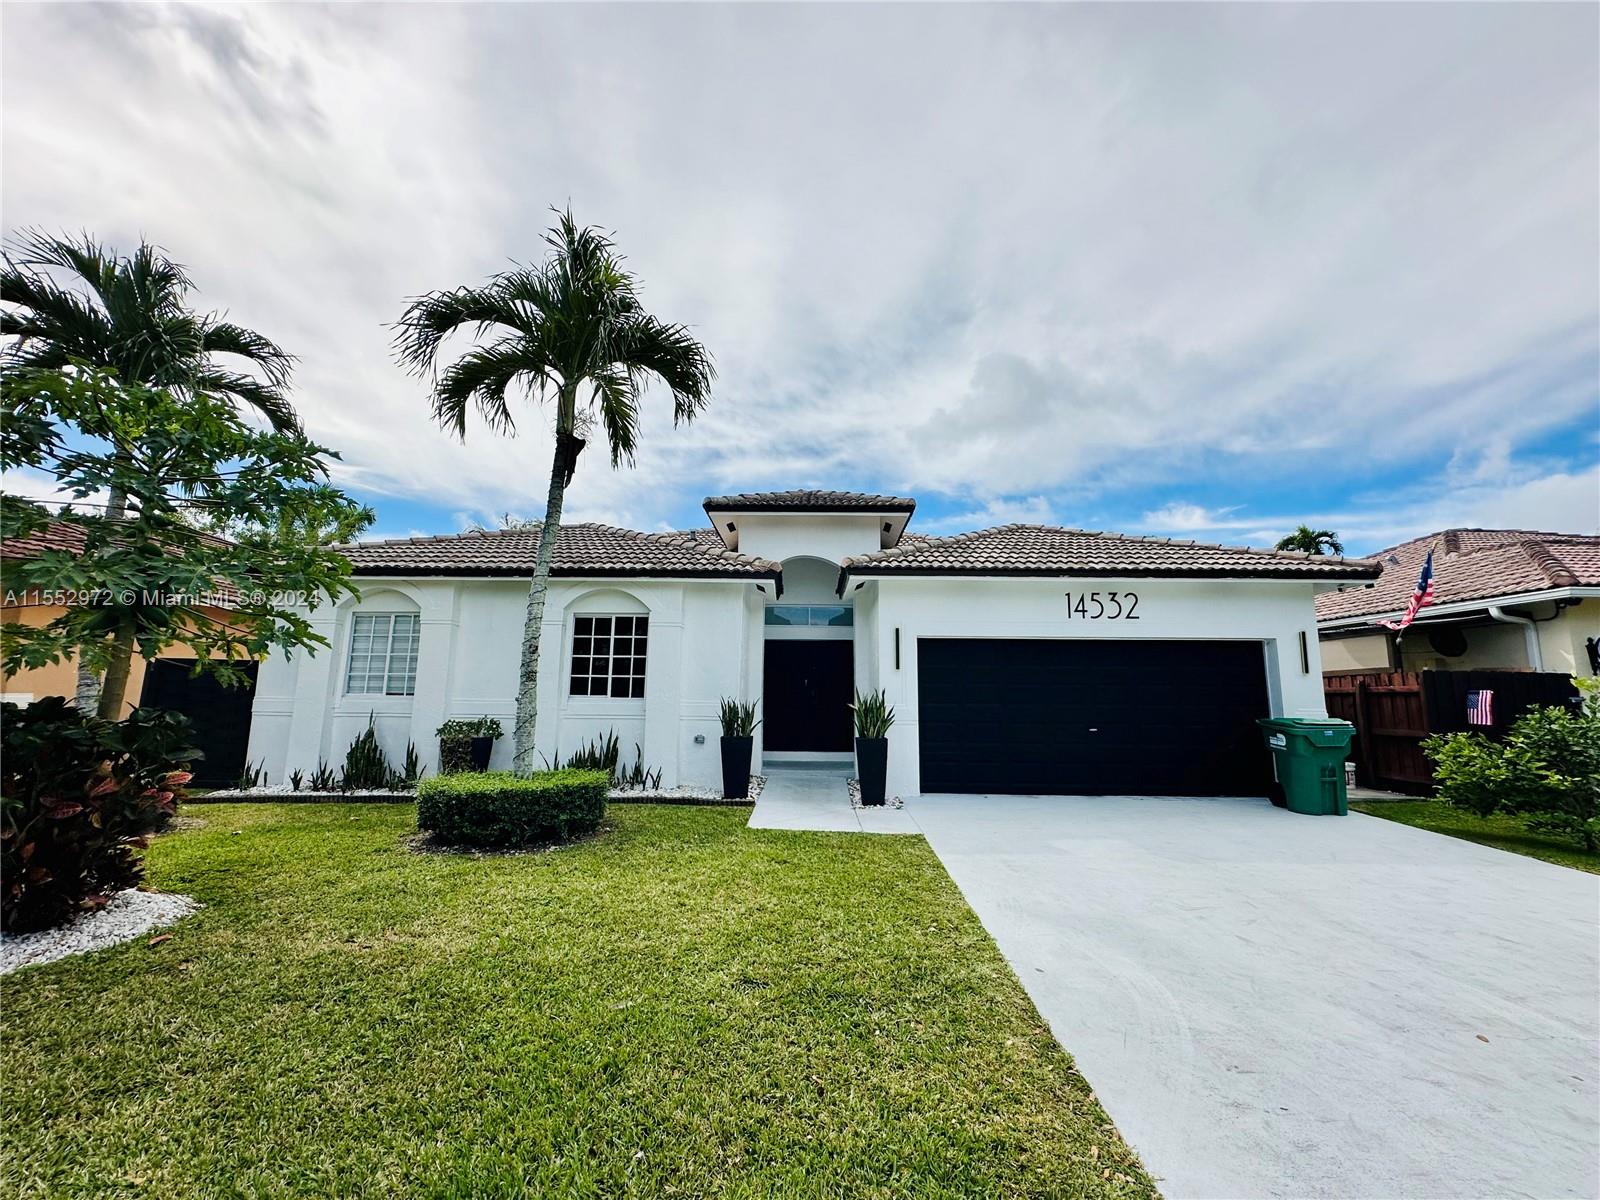 14532 SW 160th Ct, Miami, Florida 33196, 4 Bedrooms Bedrooms, ,2 BathroomsBathrooms,Residential,For Sale,14532 SW 160th Ct,A11552972